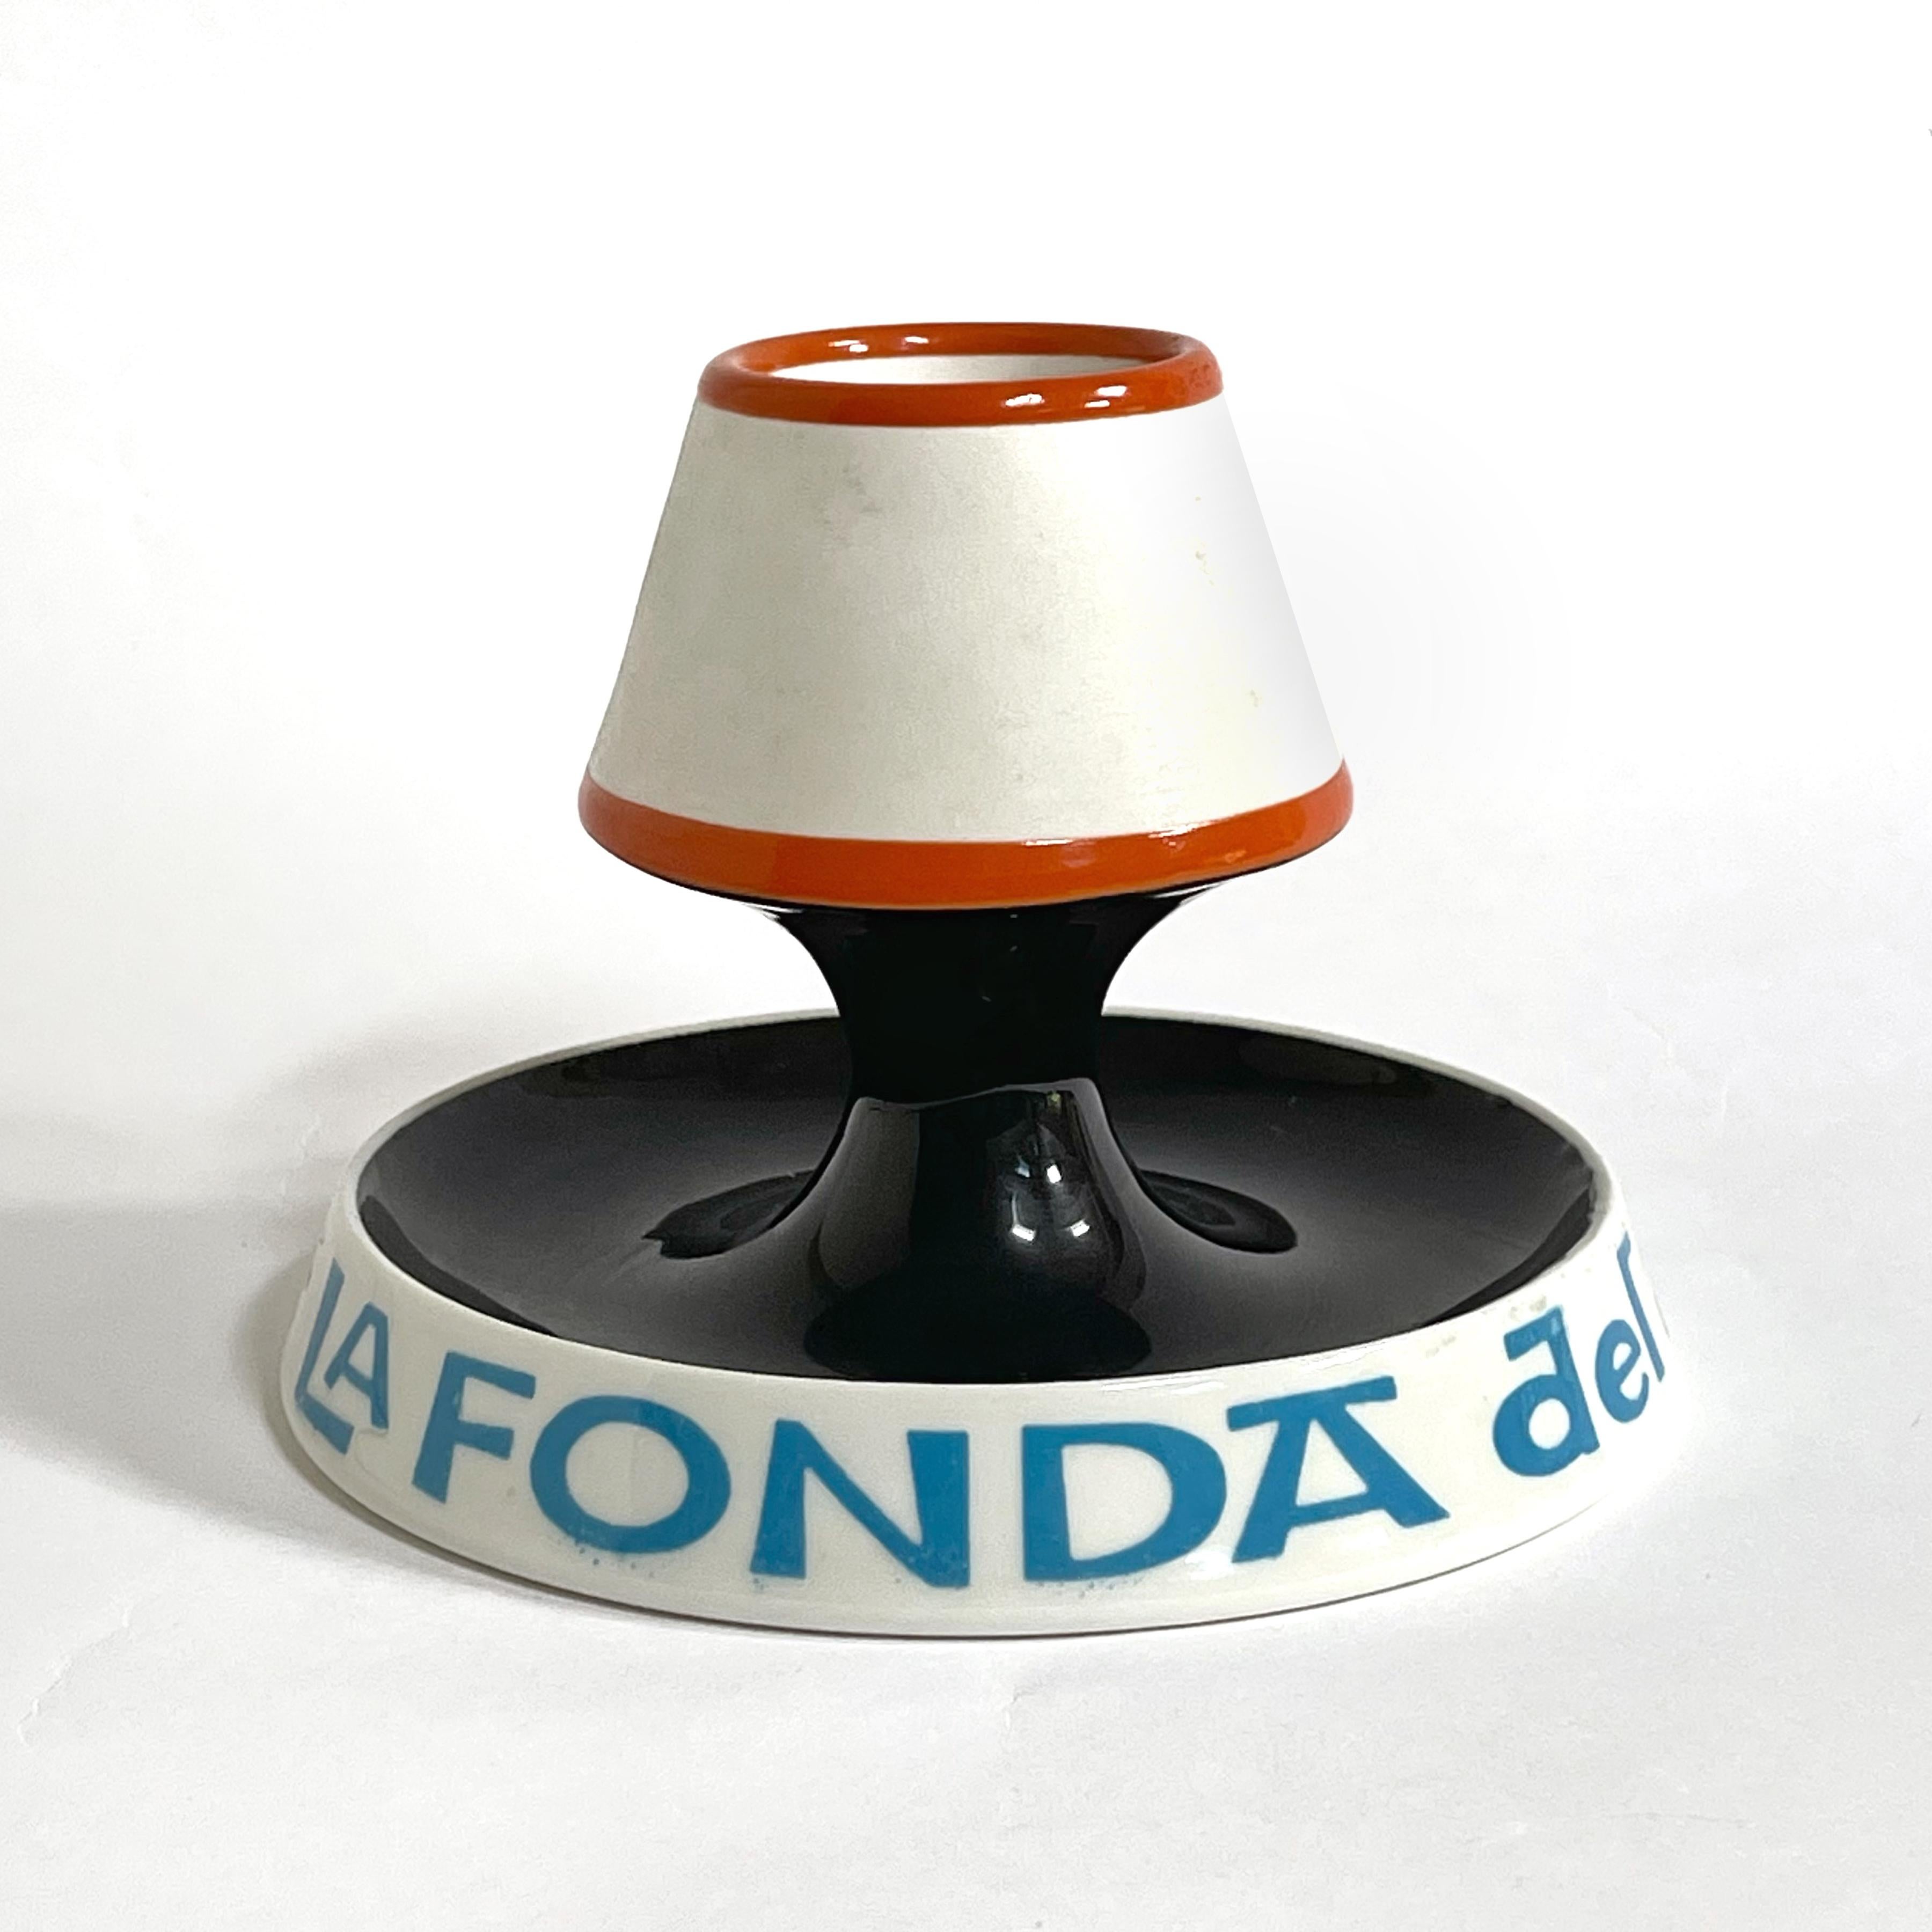 This sweet, sculptural piece designed by Alexander Girard and made by Mayer China Minners & Co for the NY restautant La Fonda del Sol. The glazed porcelain form is both a match holder/ striker, and an ashtray. This is a great example of Girard's